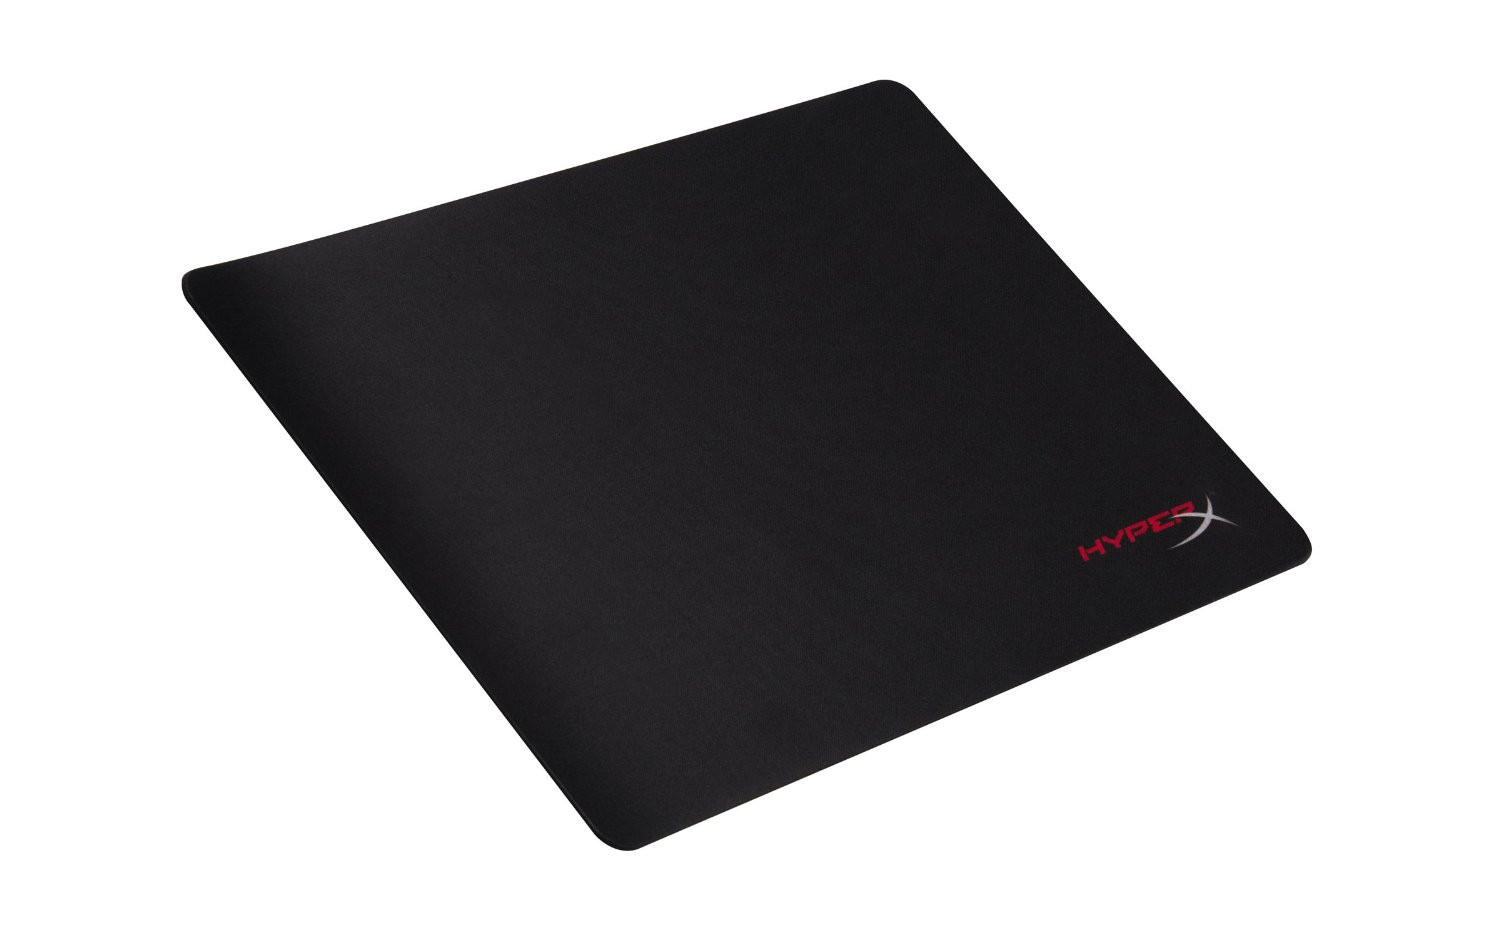 Kingston HyperX Fury Pro Gaming Mouse Pad (Small) | Falcon Computers